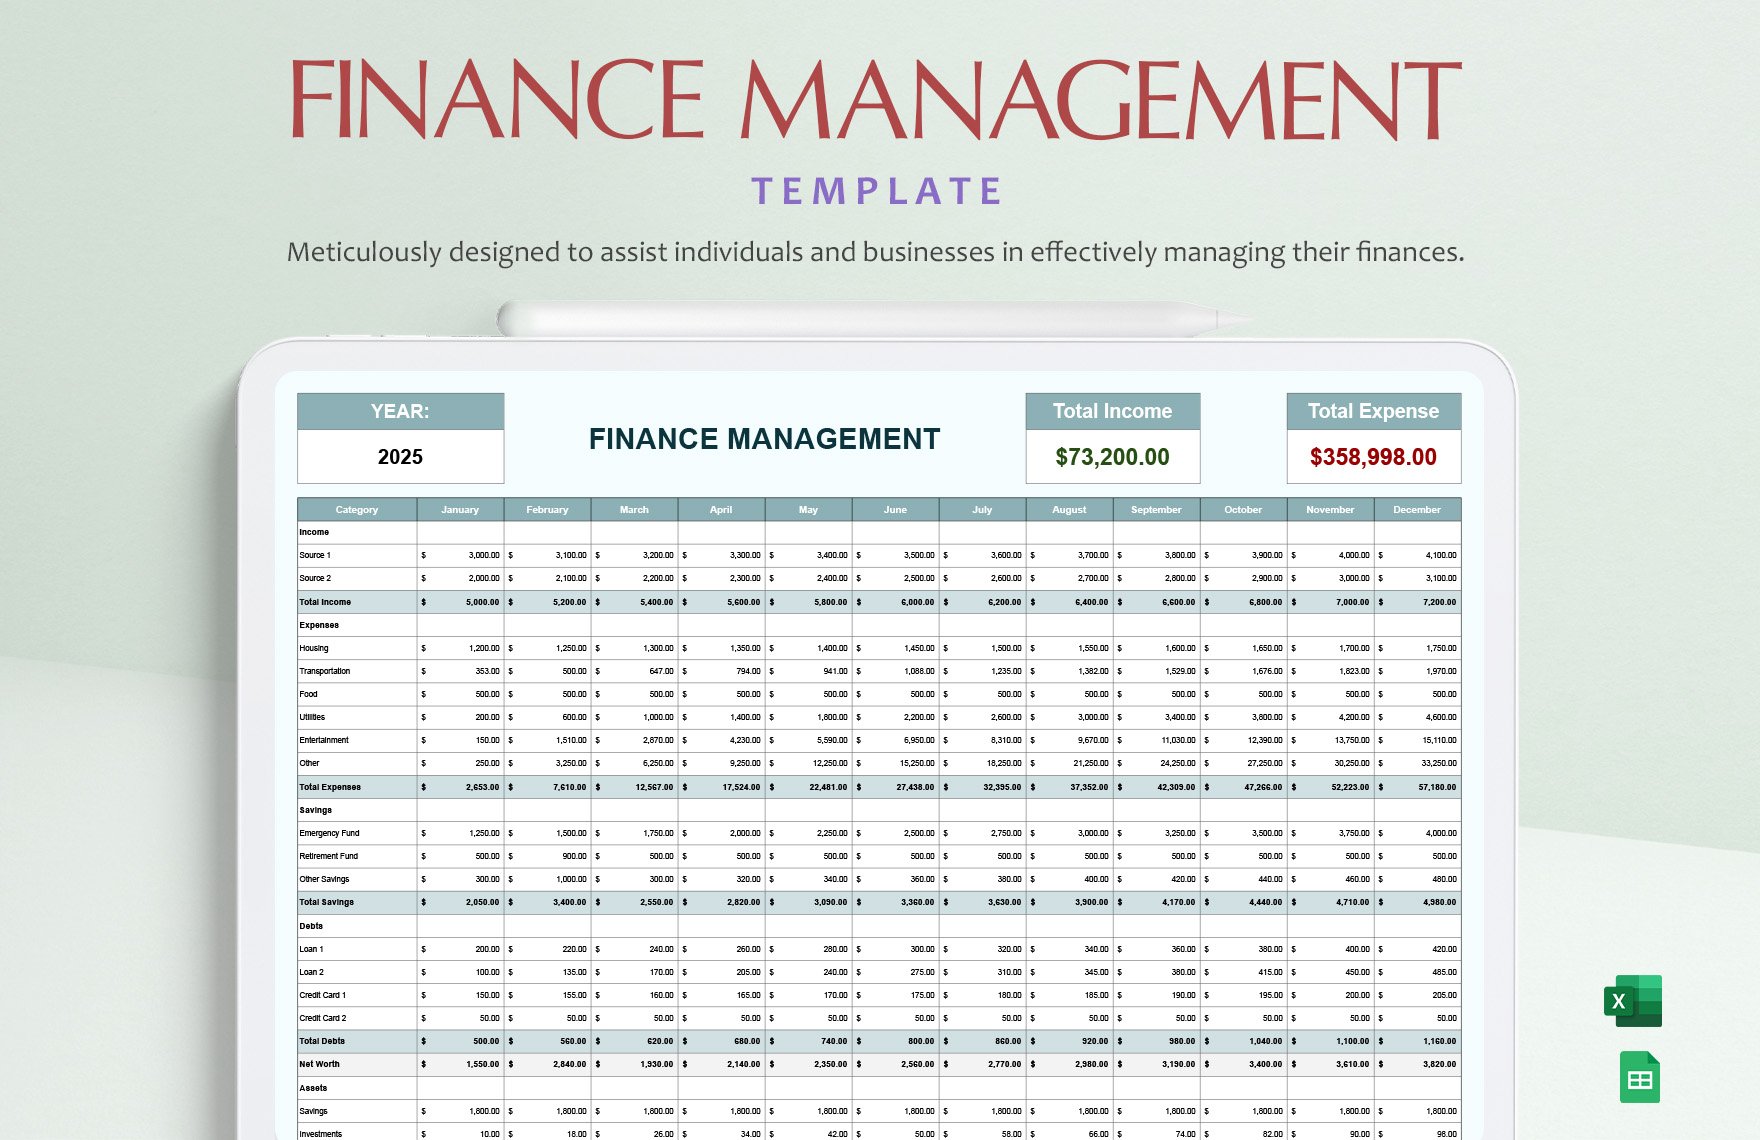 Finance Management Template in Excel, Google Sheets